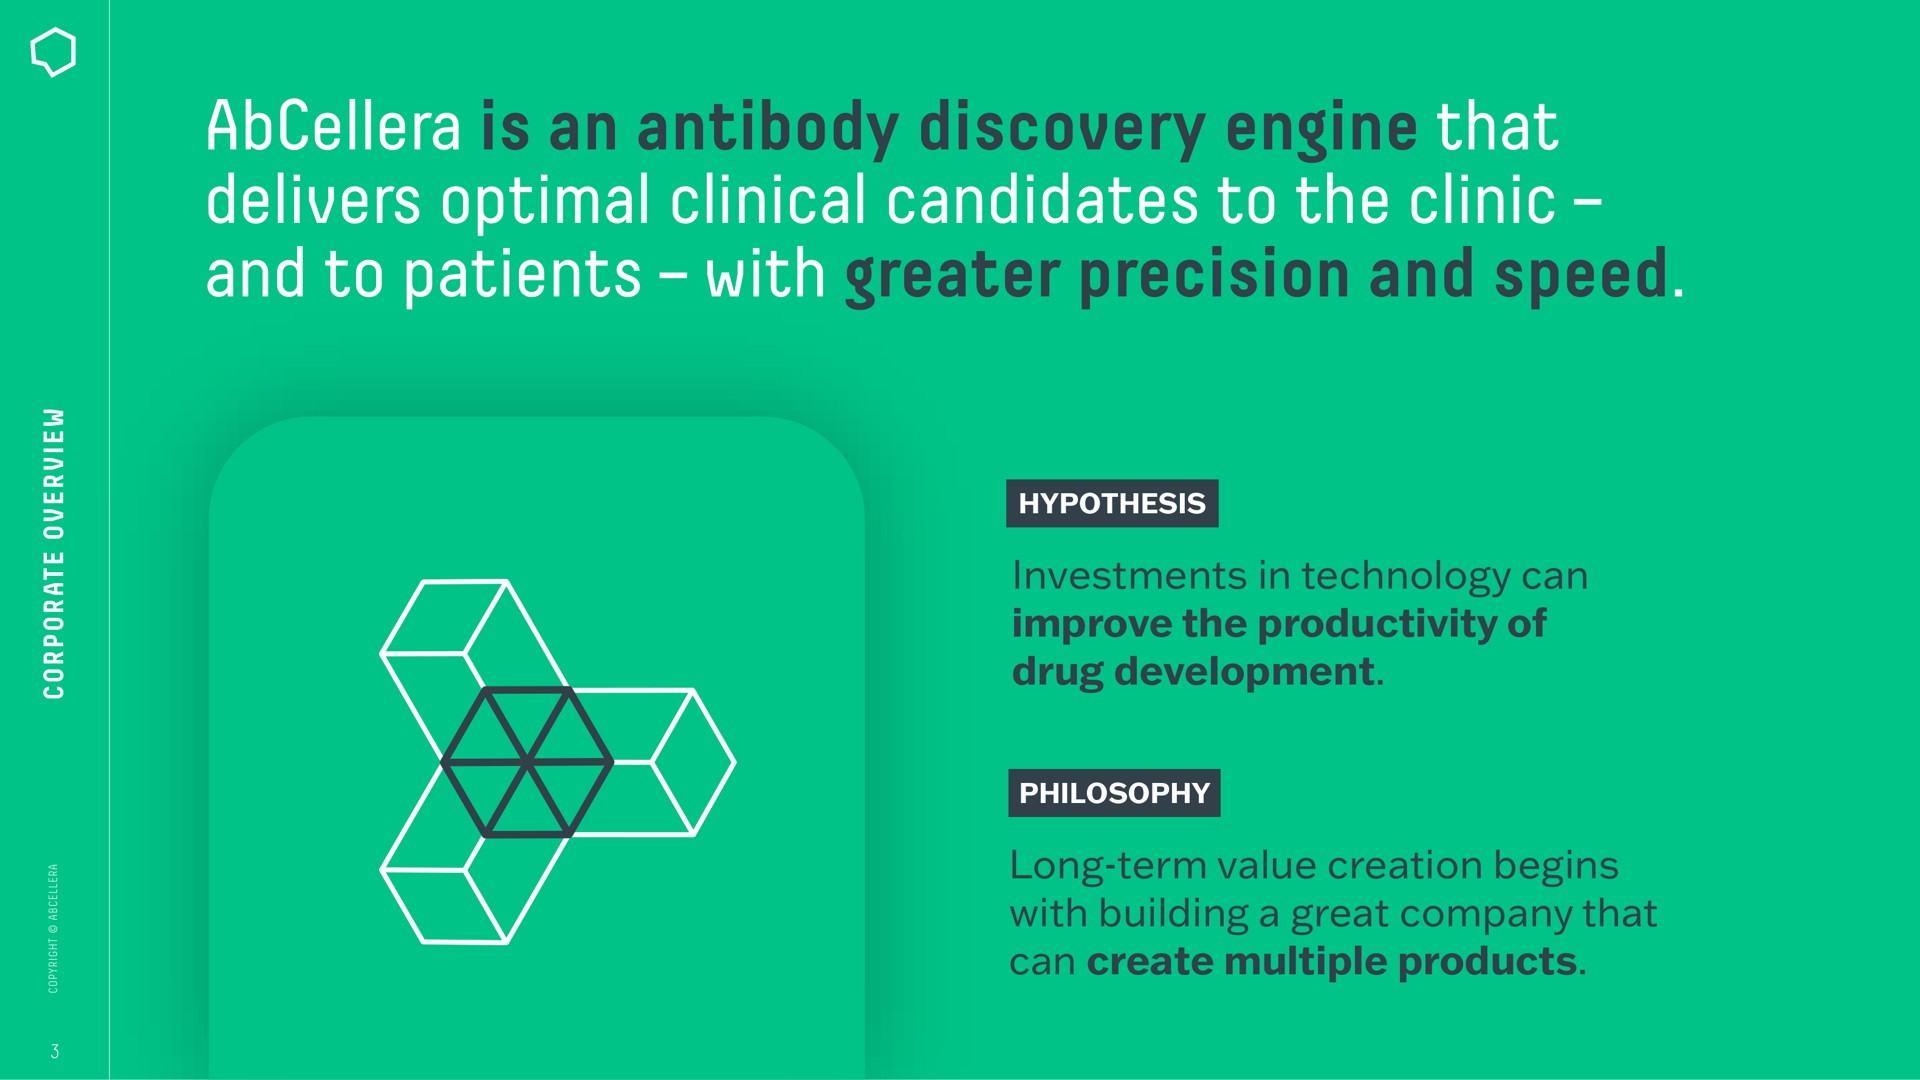 is an antibody discovery engine that delivers optimal clinical candidates to the clinic and to patients with greater precision and speed tore | AbCellera